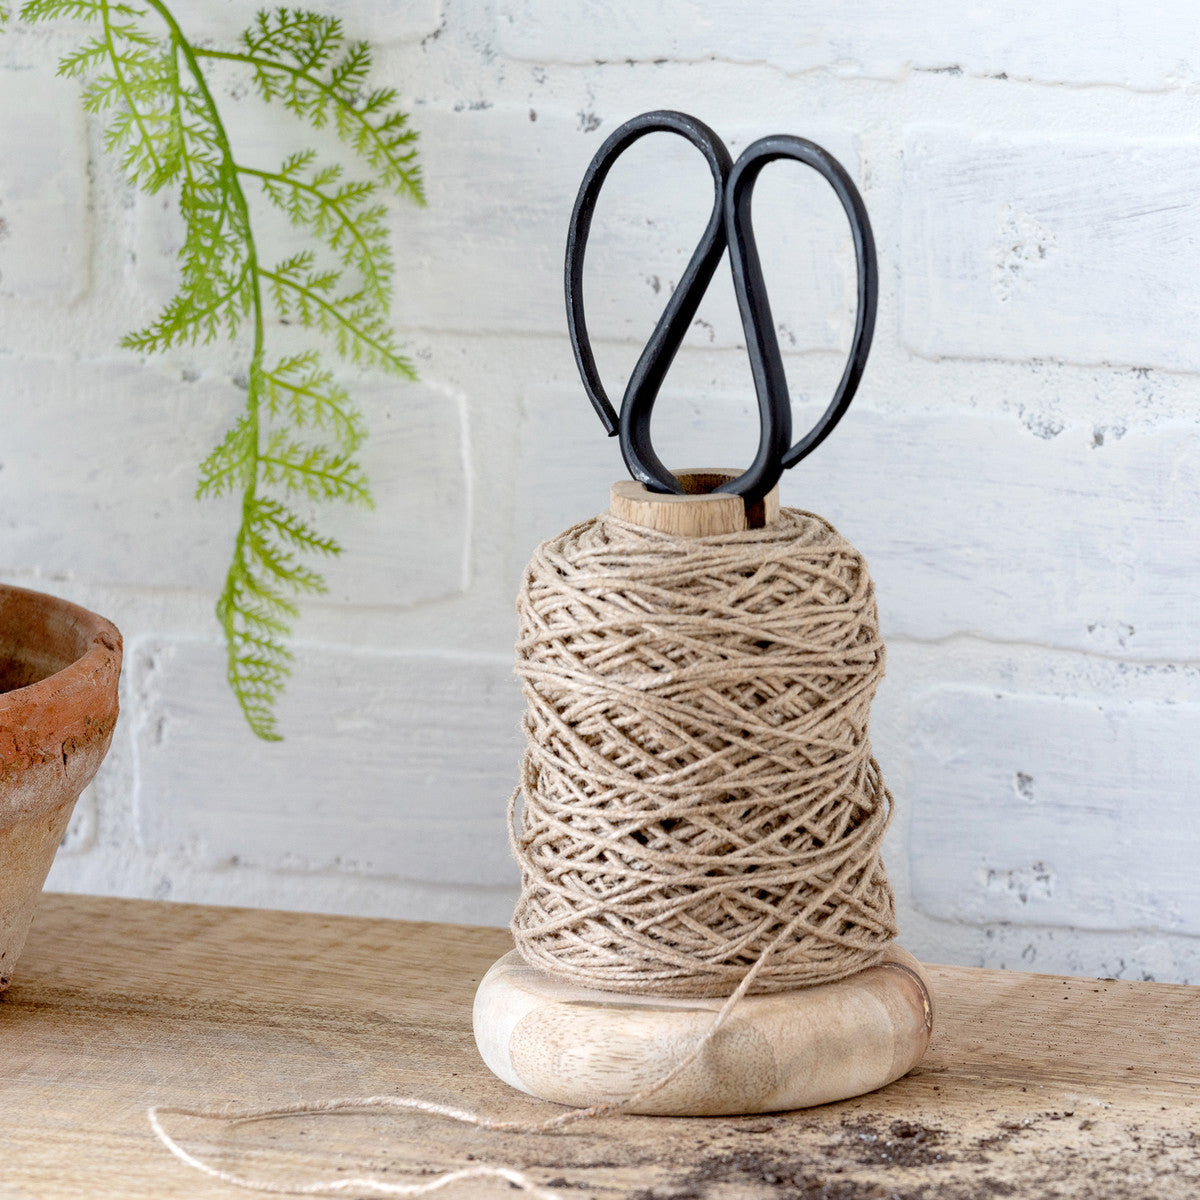 wood garden jute spool with black snip scissors tucked inside on a white brick wall with an artificial fern 